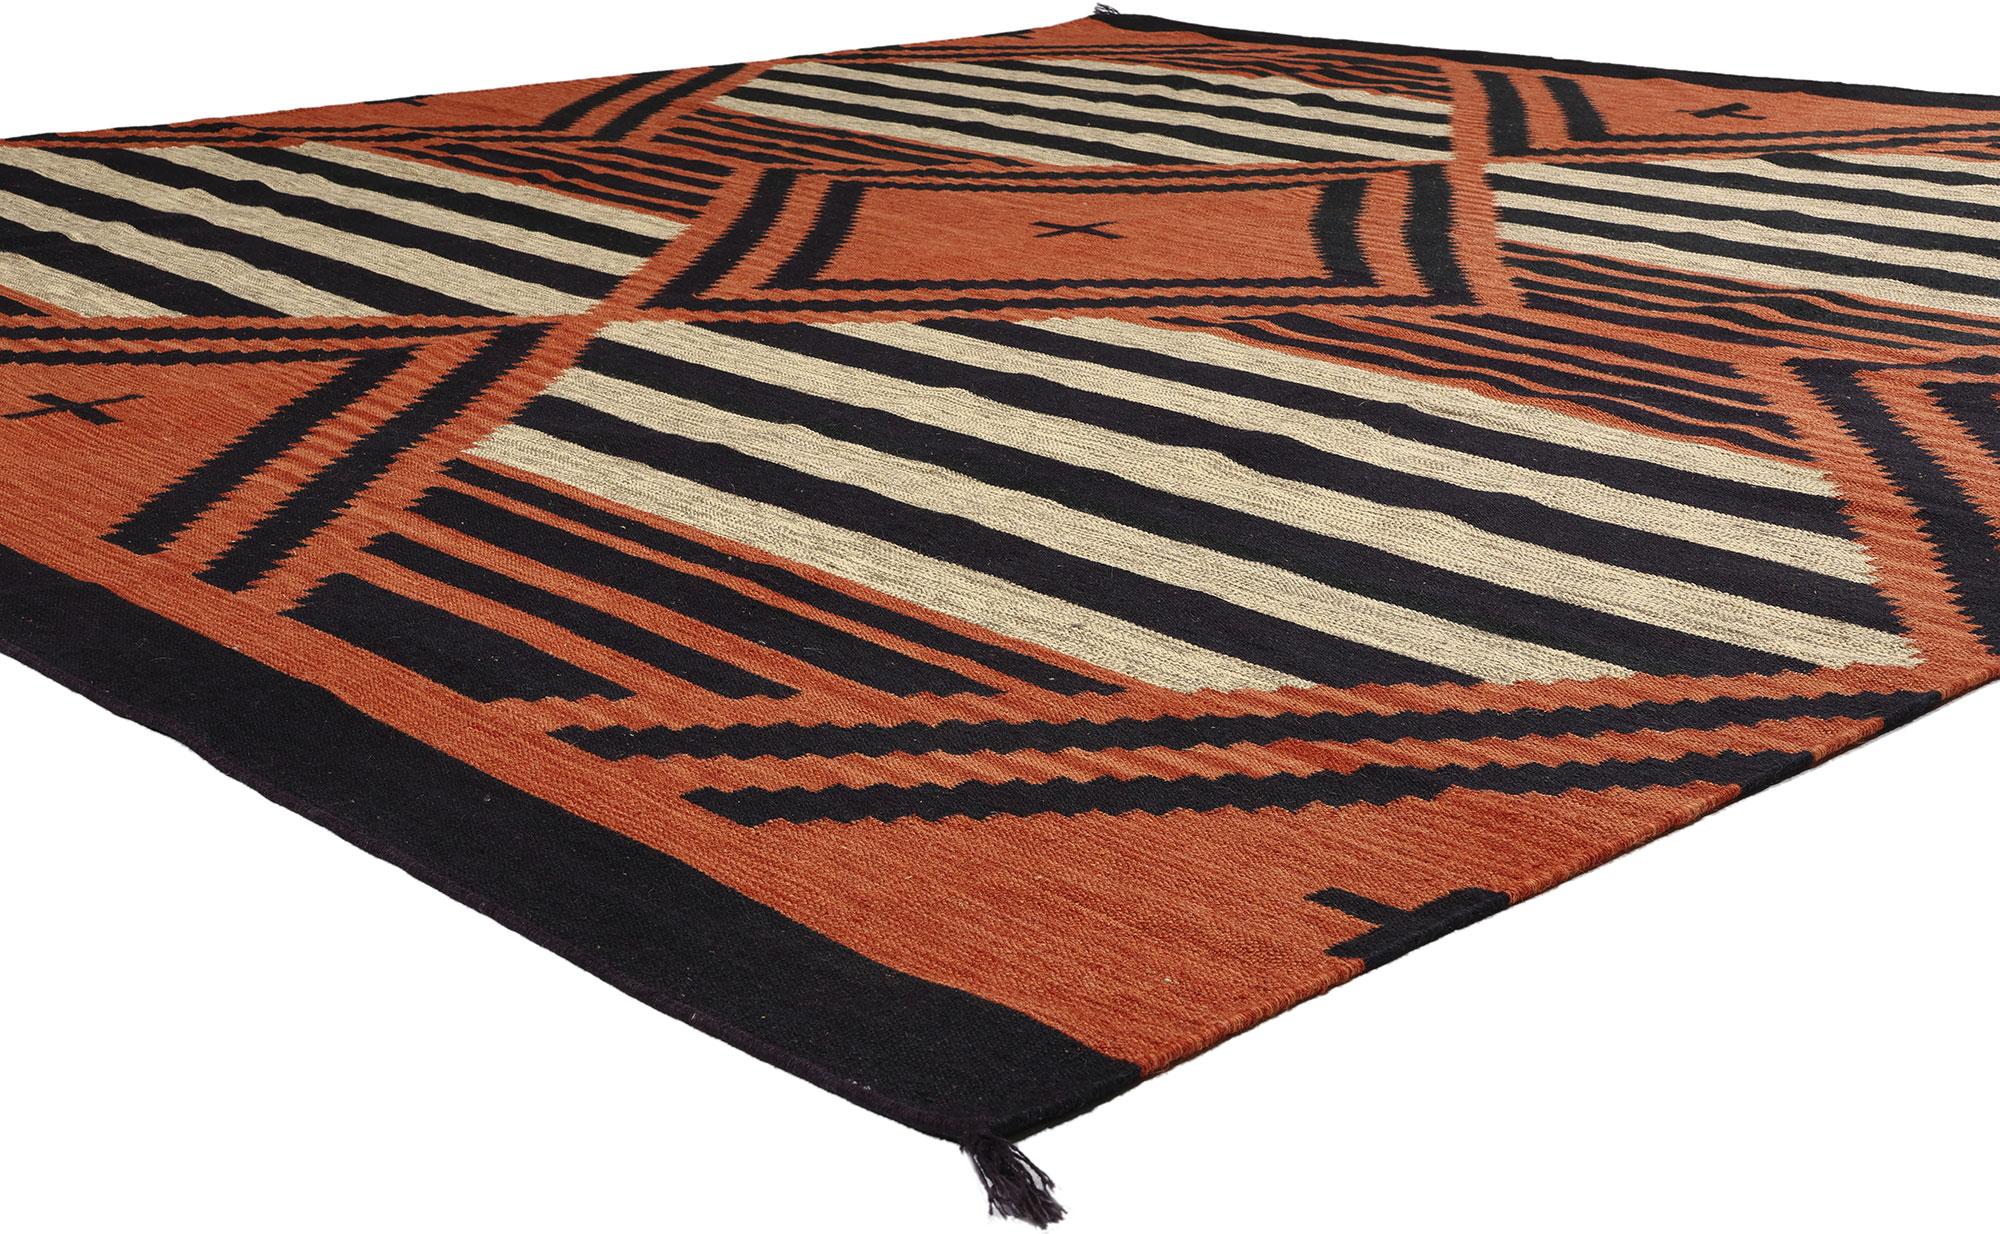 81042 Southwest Modern Chief Blanket Navajo-Style Rug, 09'10 x 10'00. Embark on an enchanting journey immersed in sunbaked warmth with this handwoven wool Chief Blanket Navajo-style rug. A testament to the seamless fusion of Contemporary Santa Fe